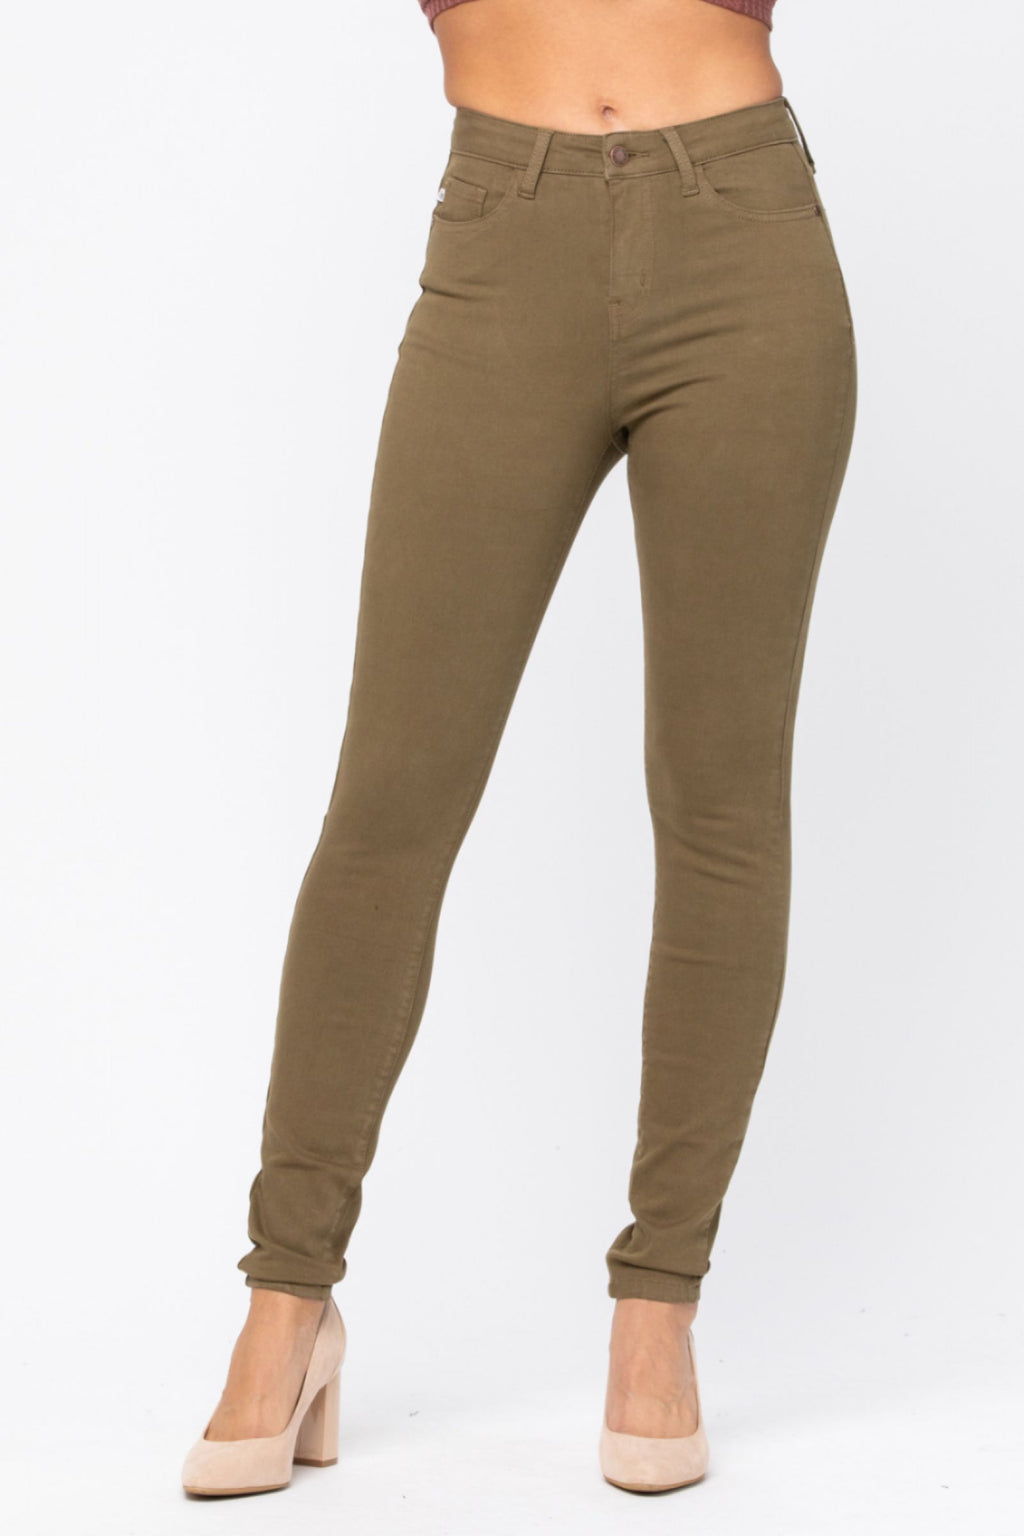 Riley - High Waisted Olive Skinny Jeans